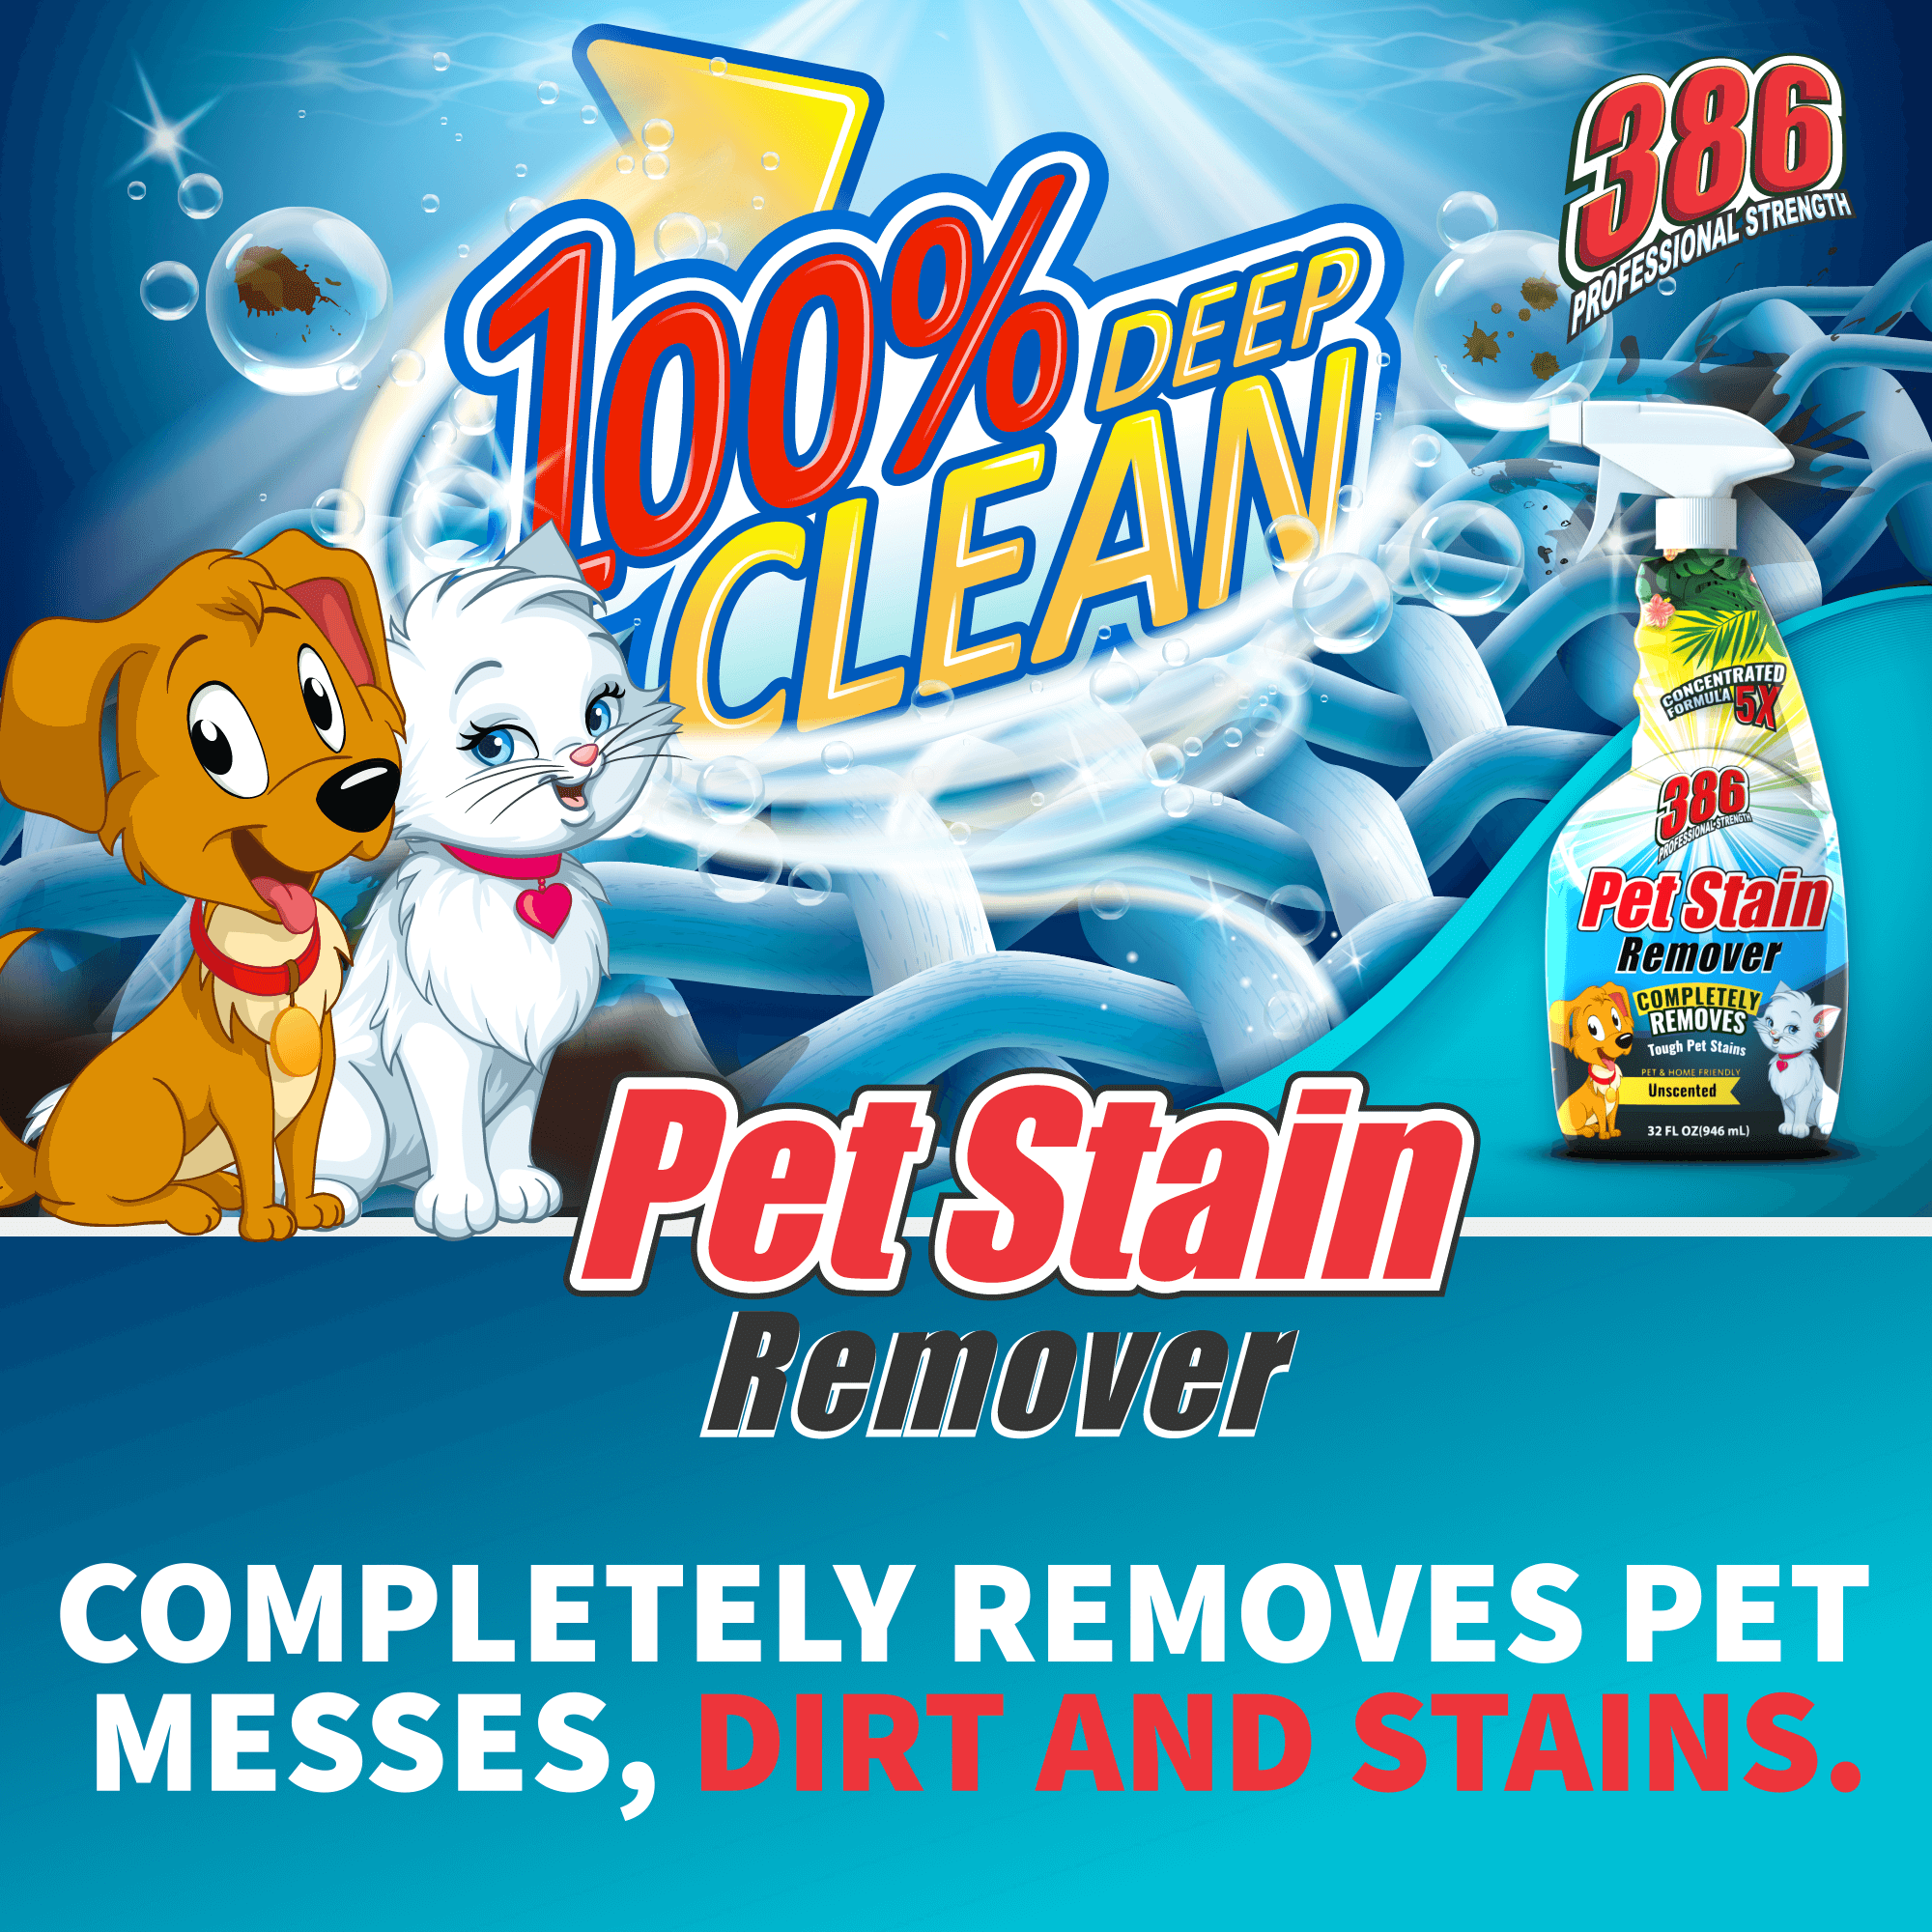 386 Pet Stain